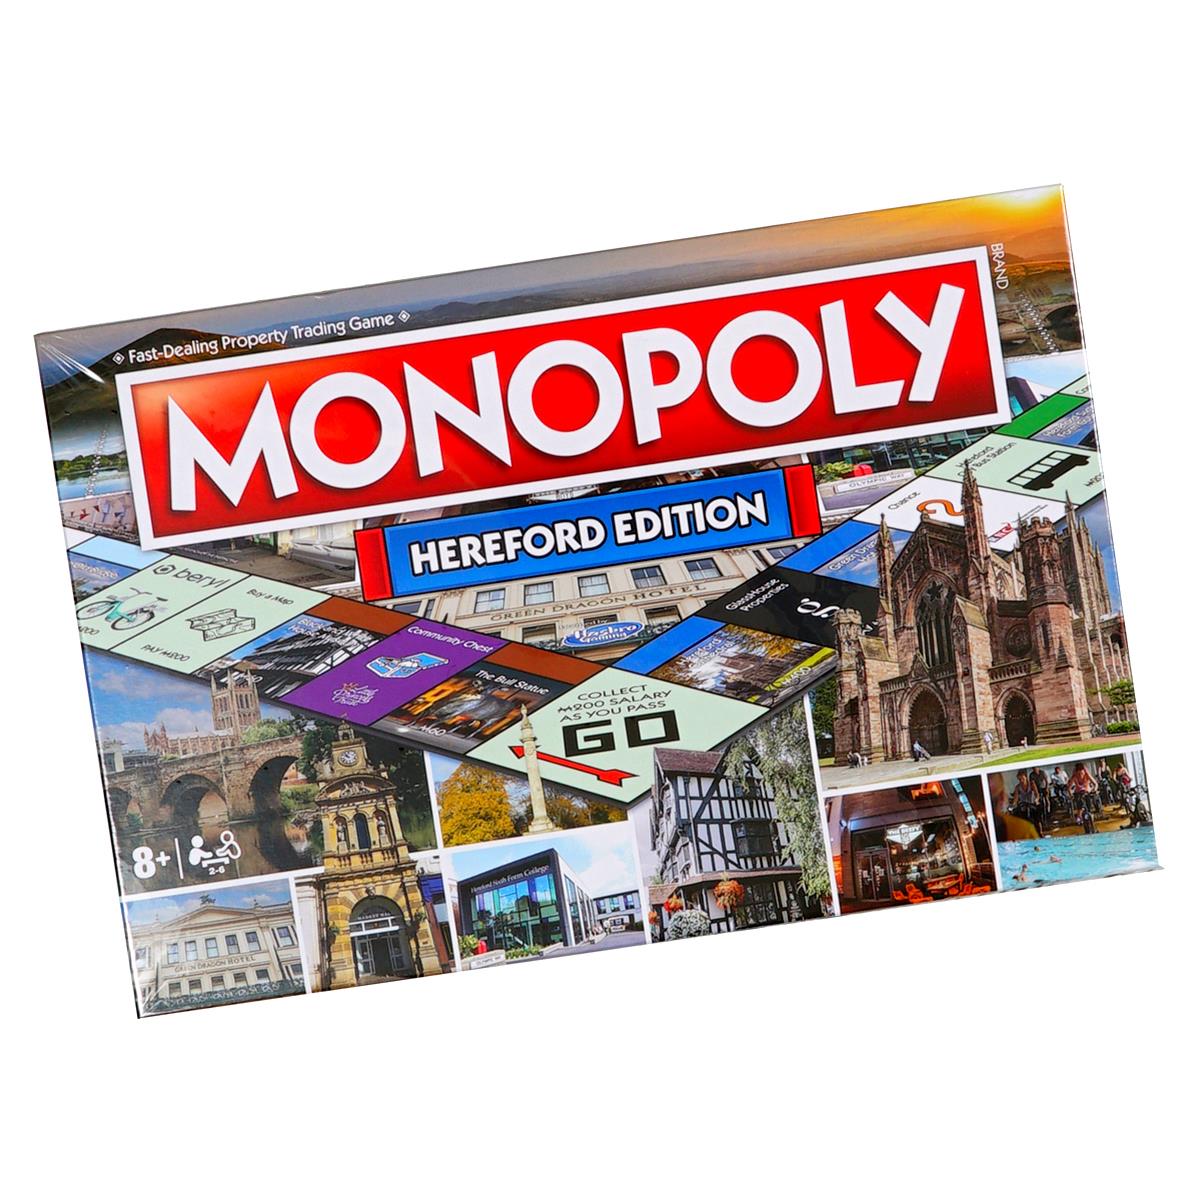 What unique features does the Hereford Monopoly have?